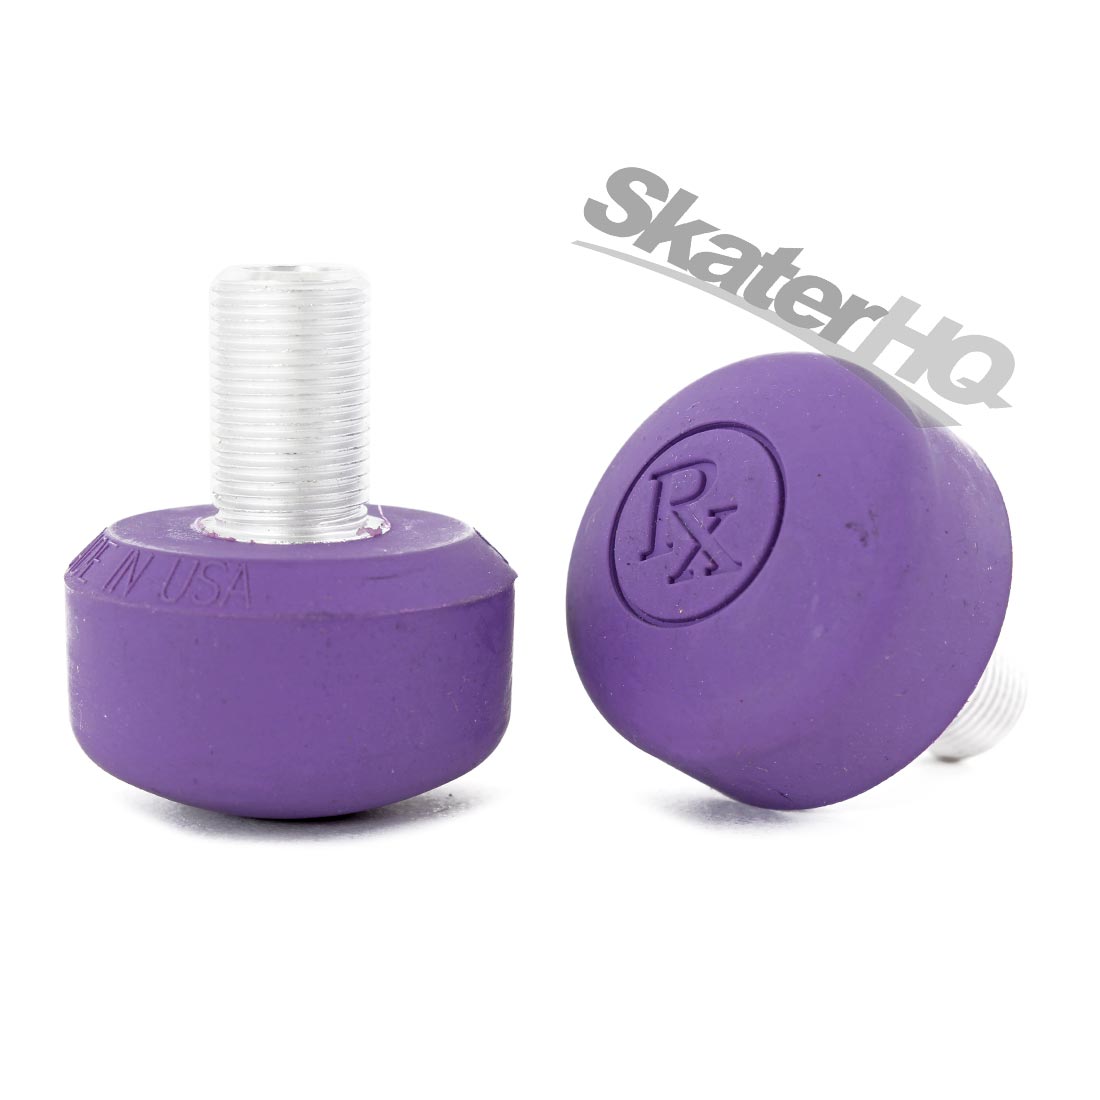 Sure-Grip RX Toe Stop Pair - Purple Roller Skate Hardware and Parts